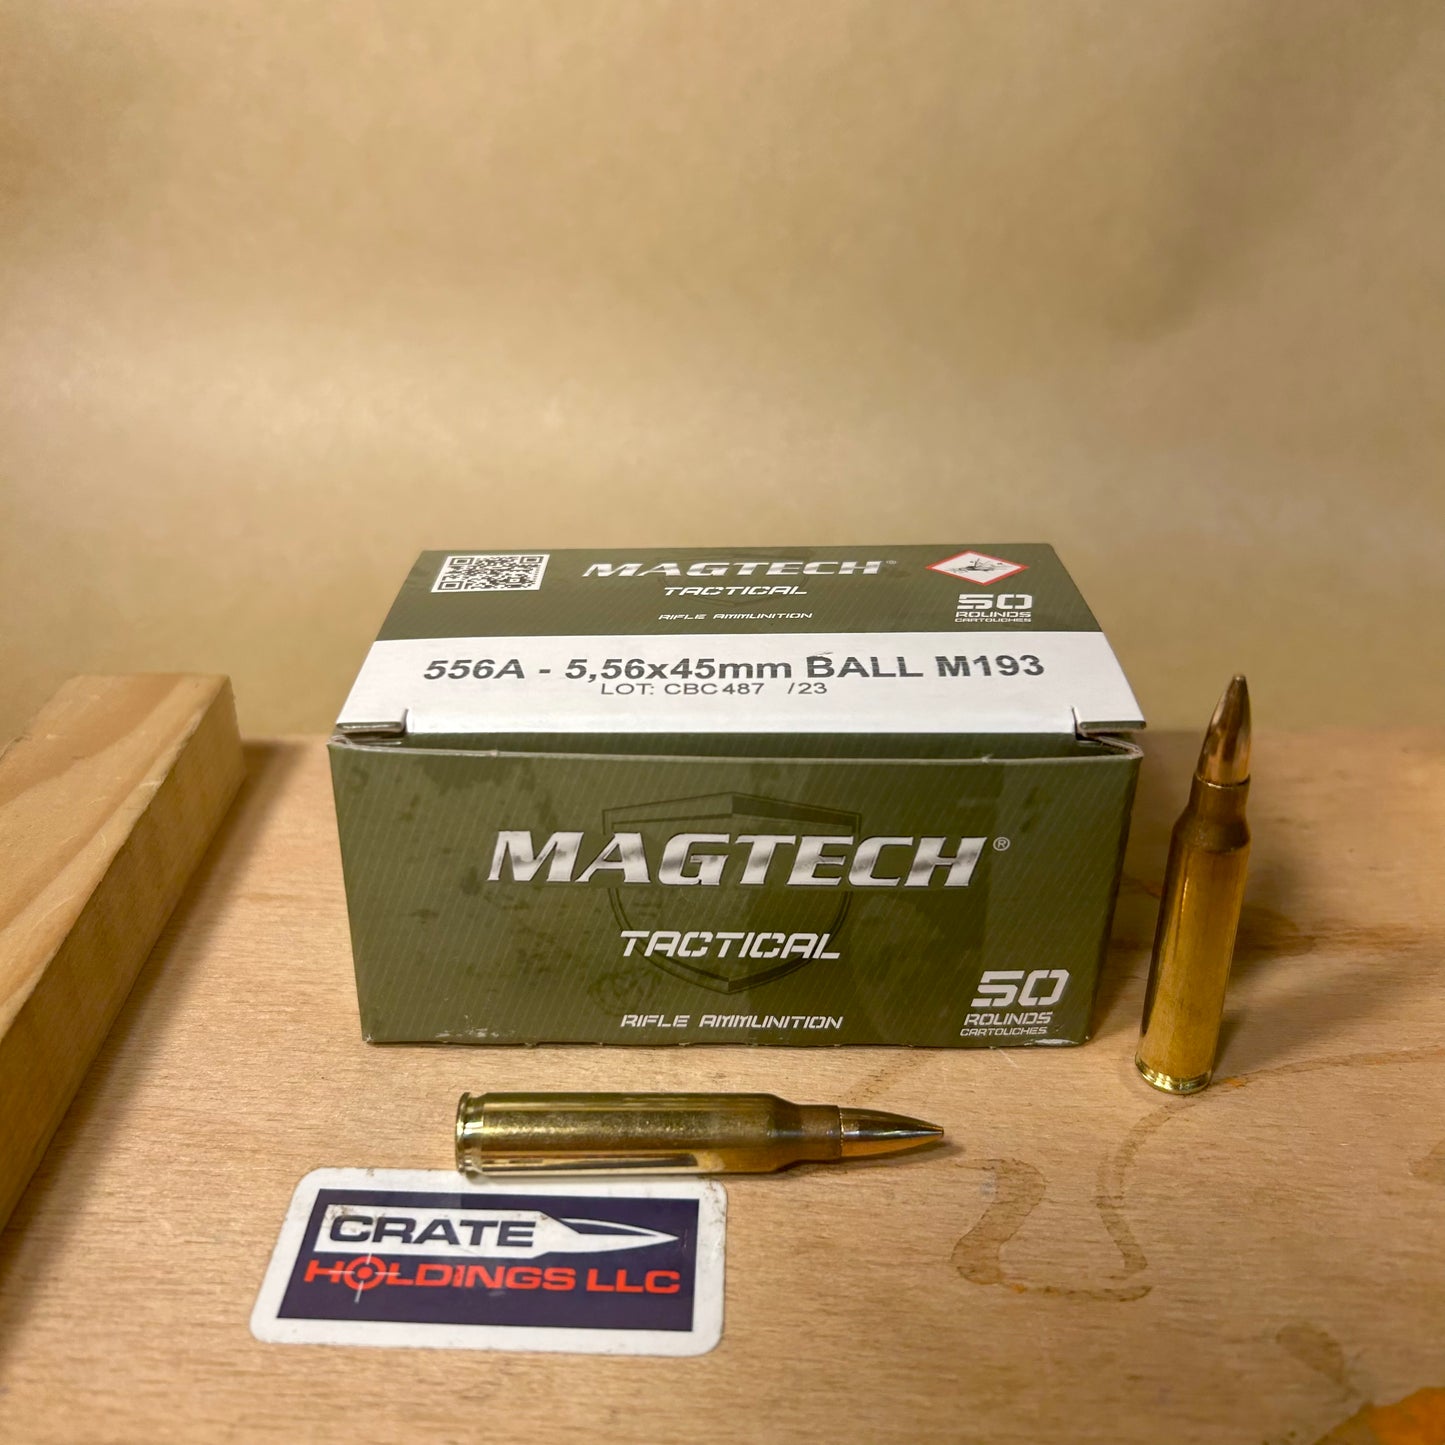 Free Shipping - 1000 Round Case Magtech 5.56 NATO Ammo M193 55gr FMJ